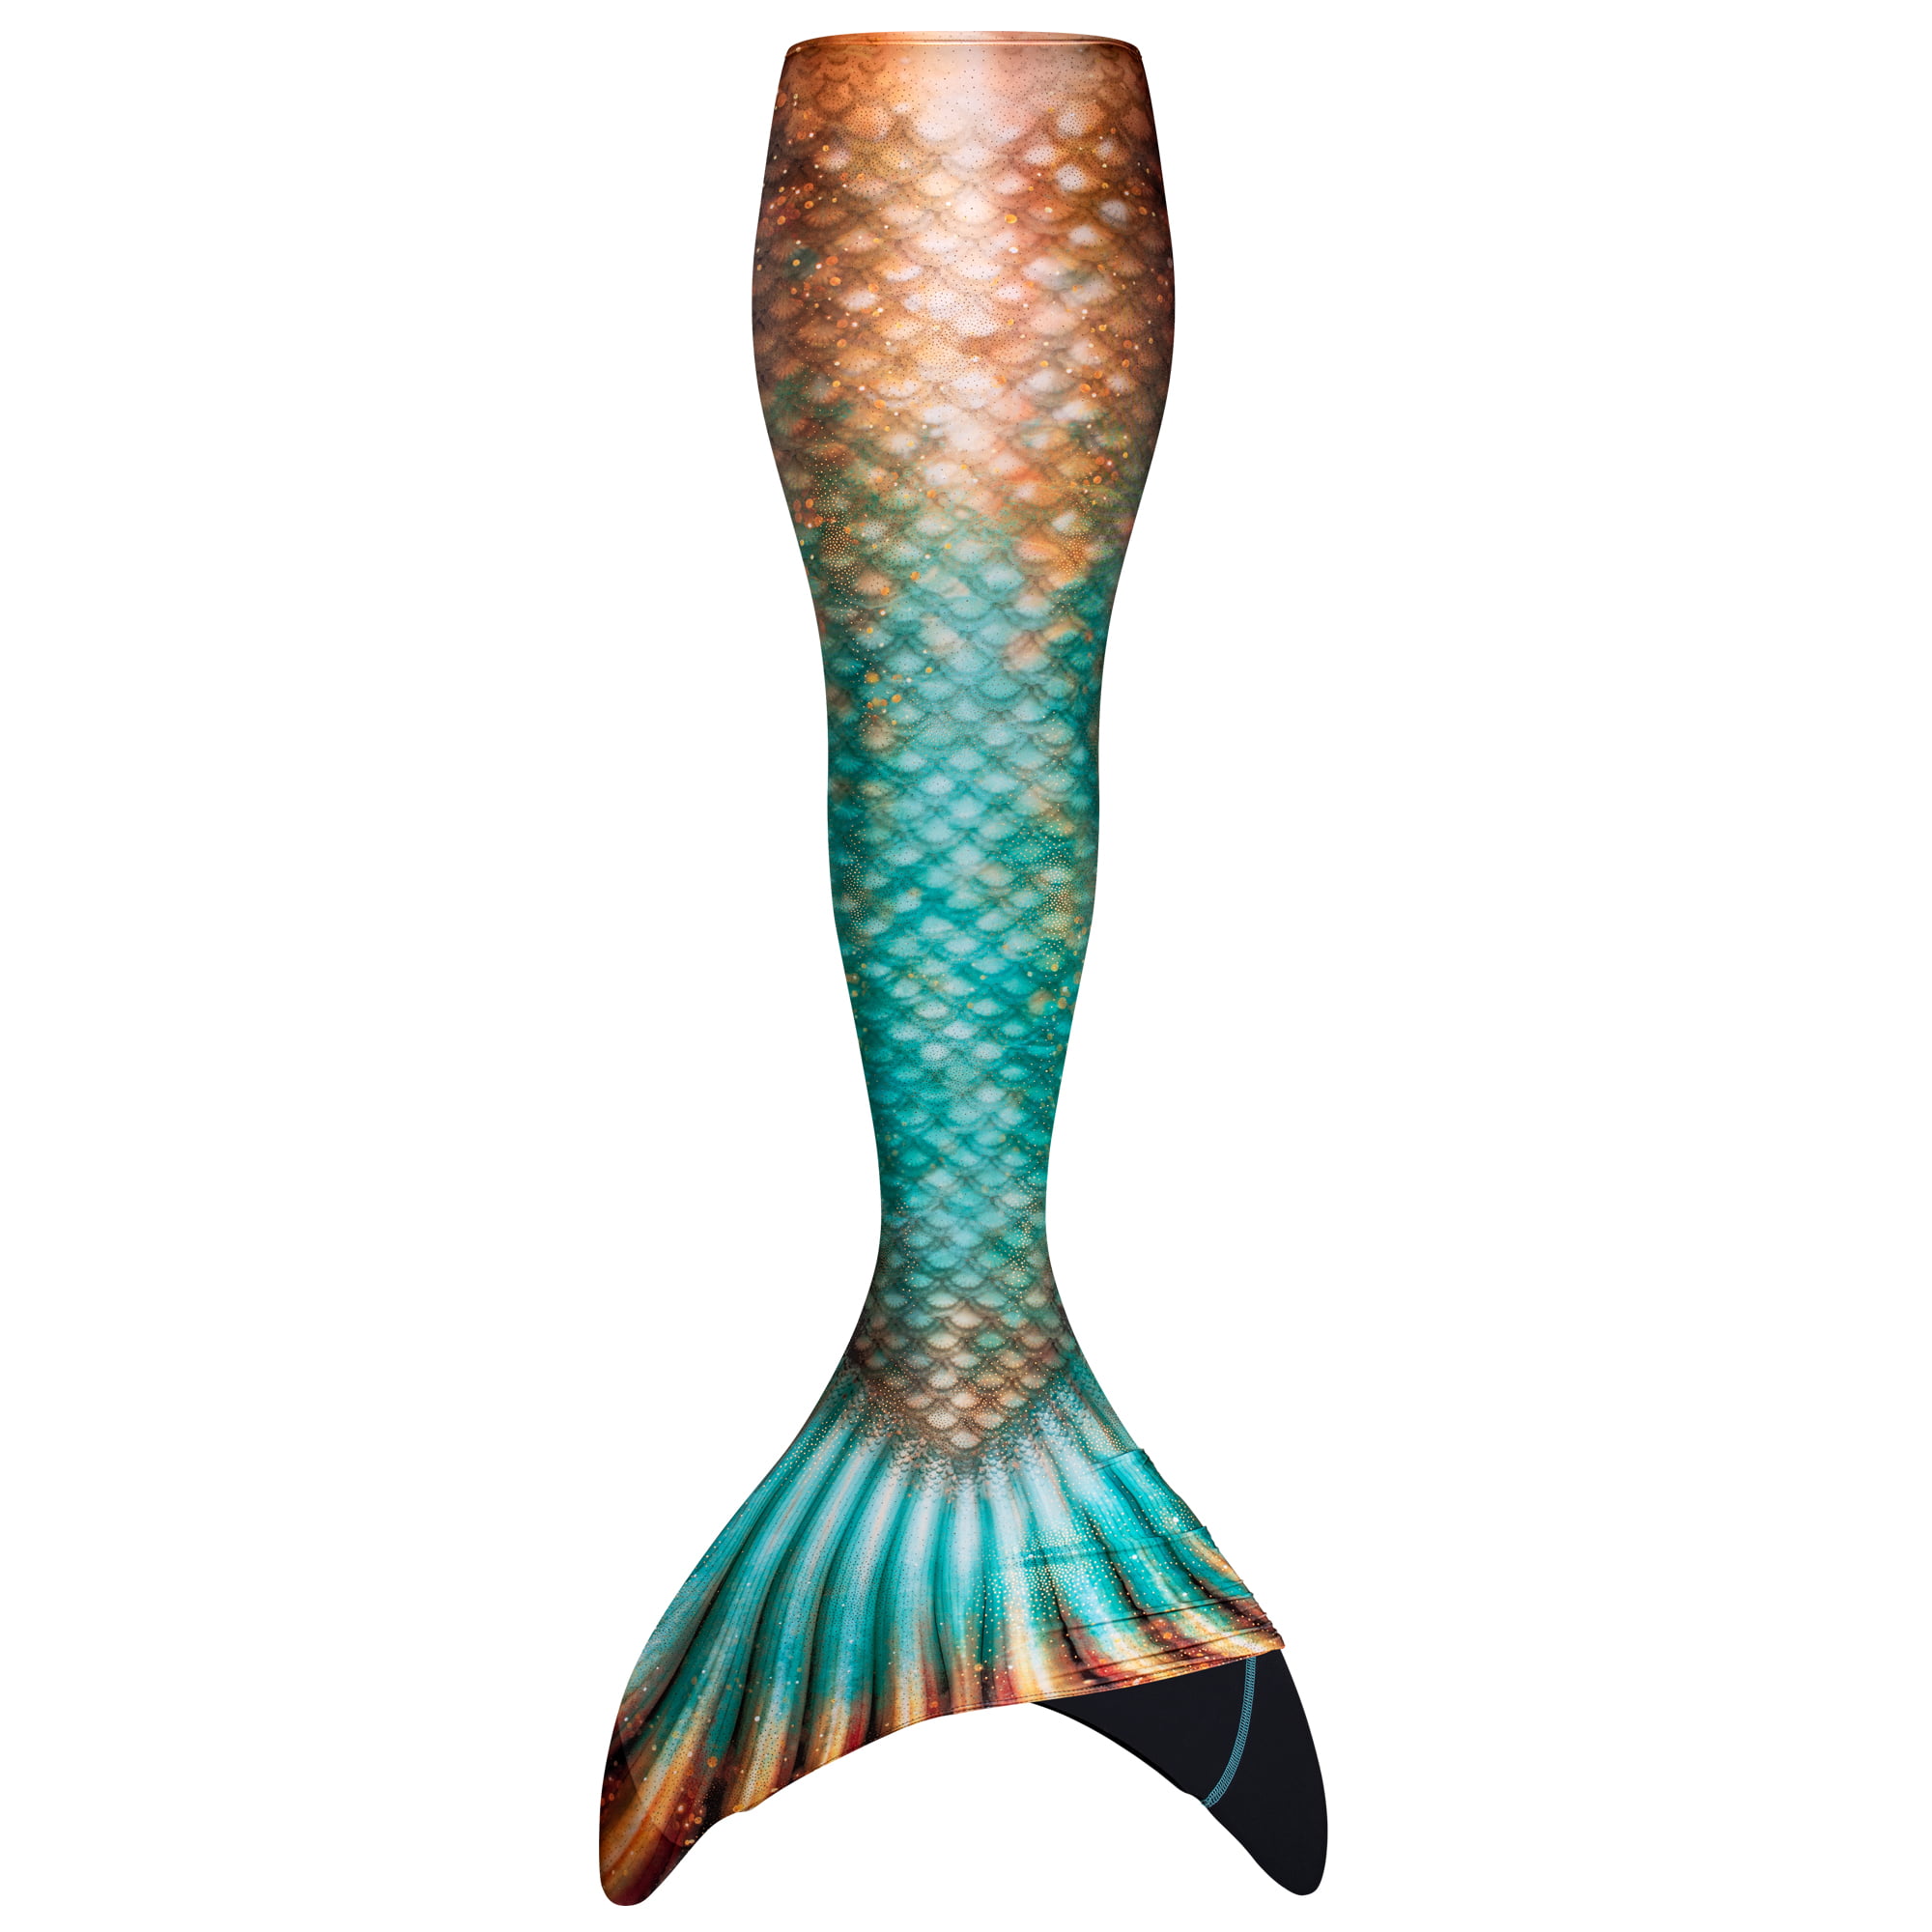 Child 12 Tiger Lily Reinforced Tips Fin Fun Mermaid Tail Only NO Monofin